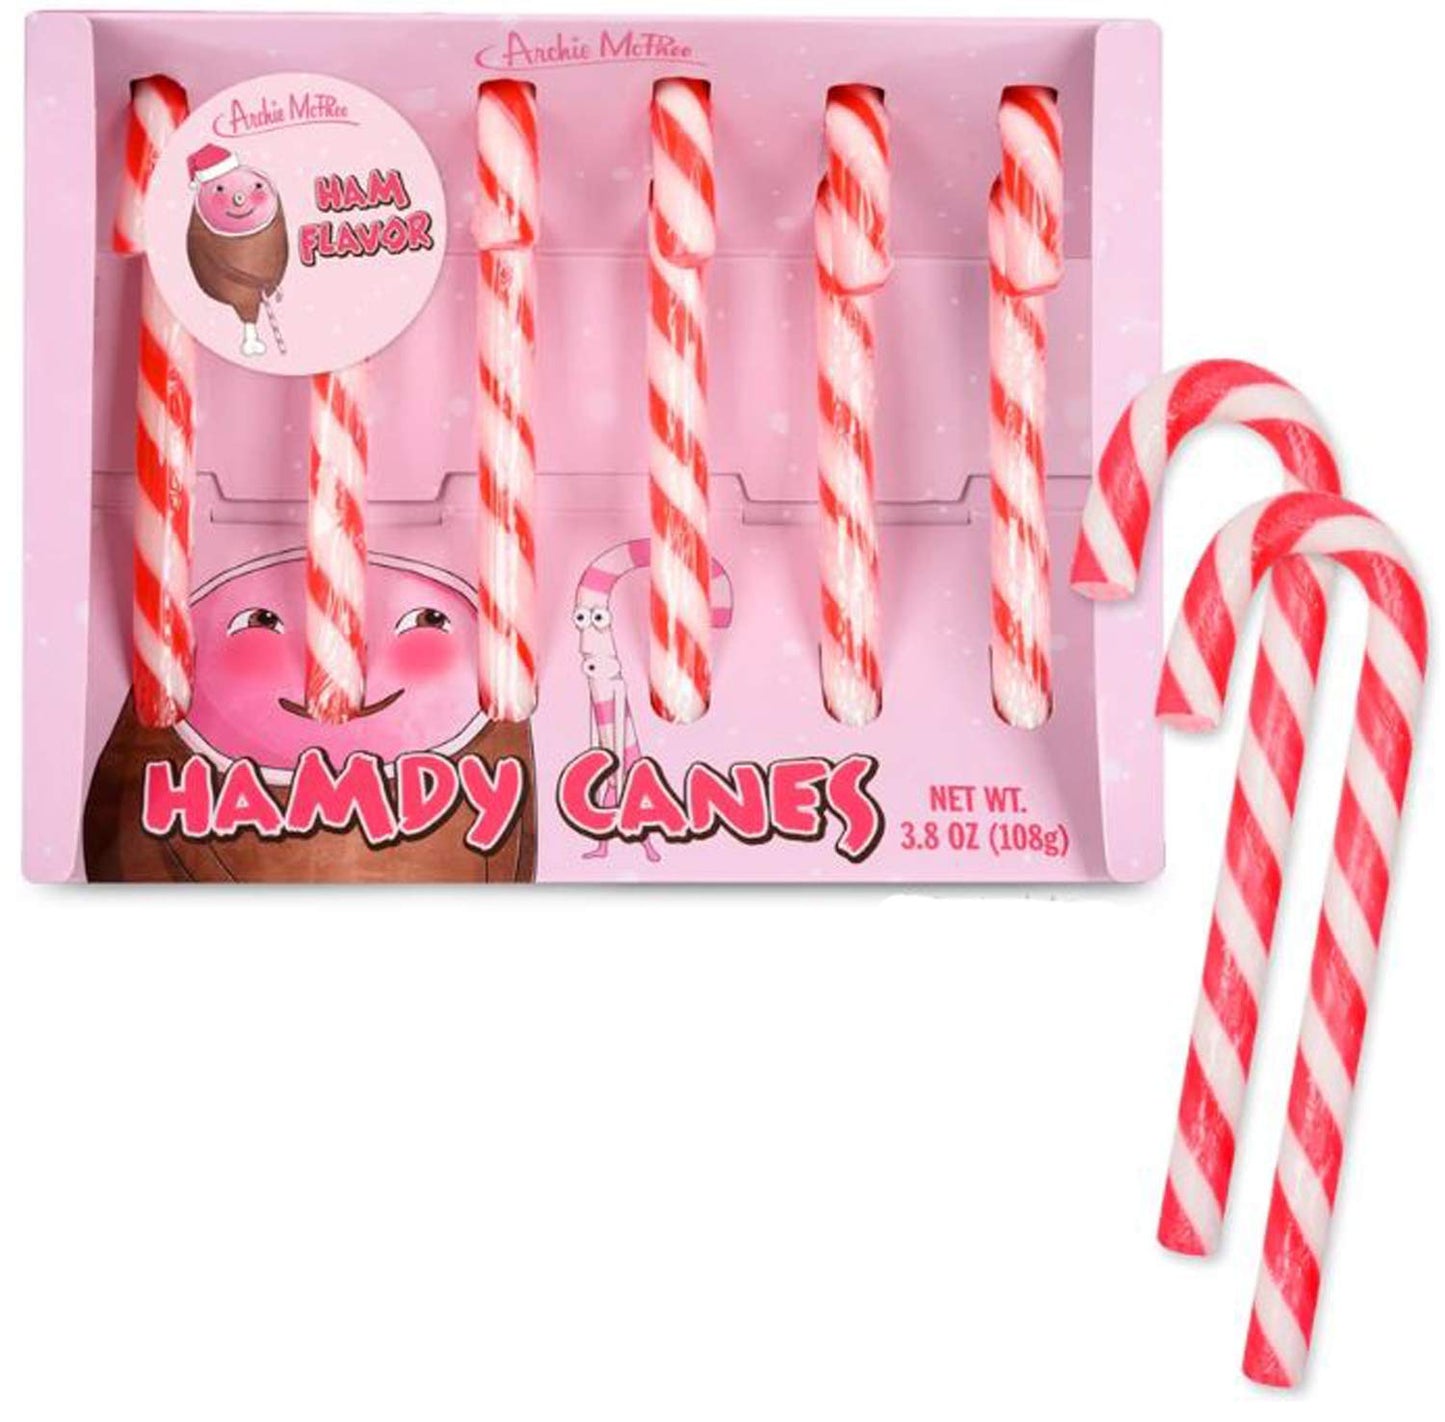 Candy Canes - Hamdy